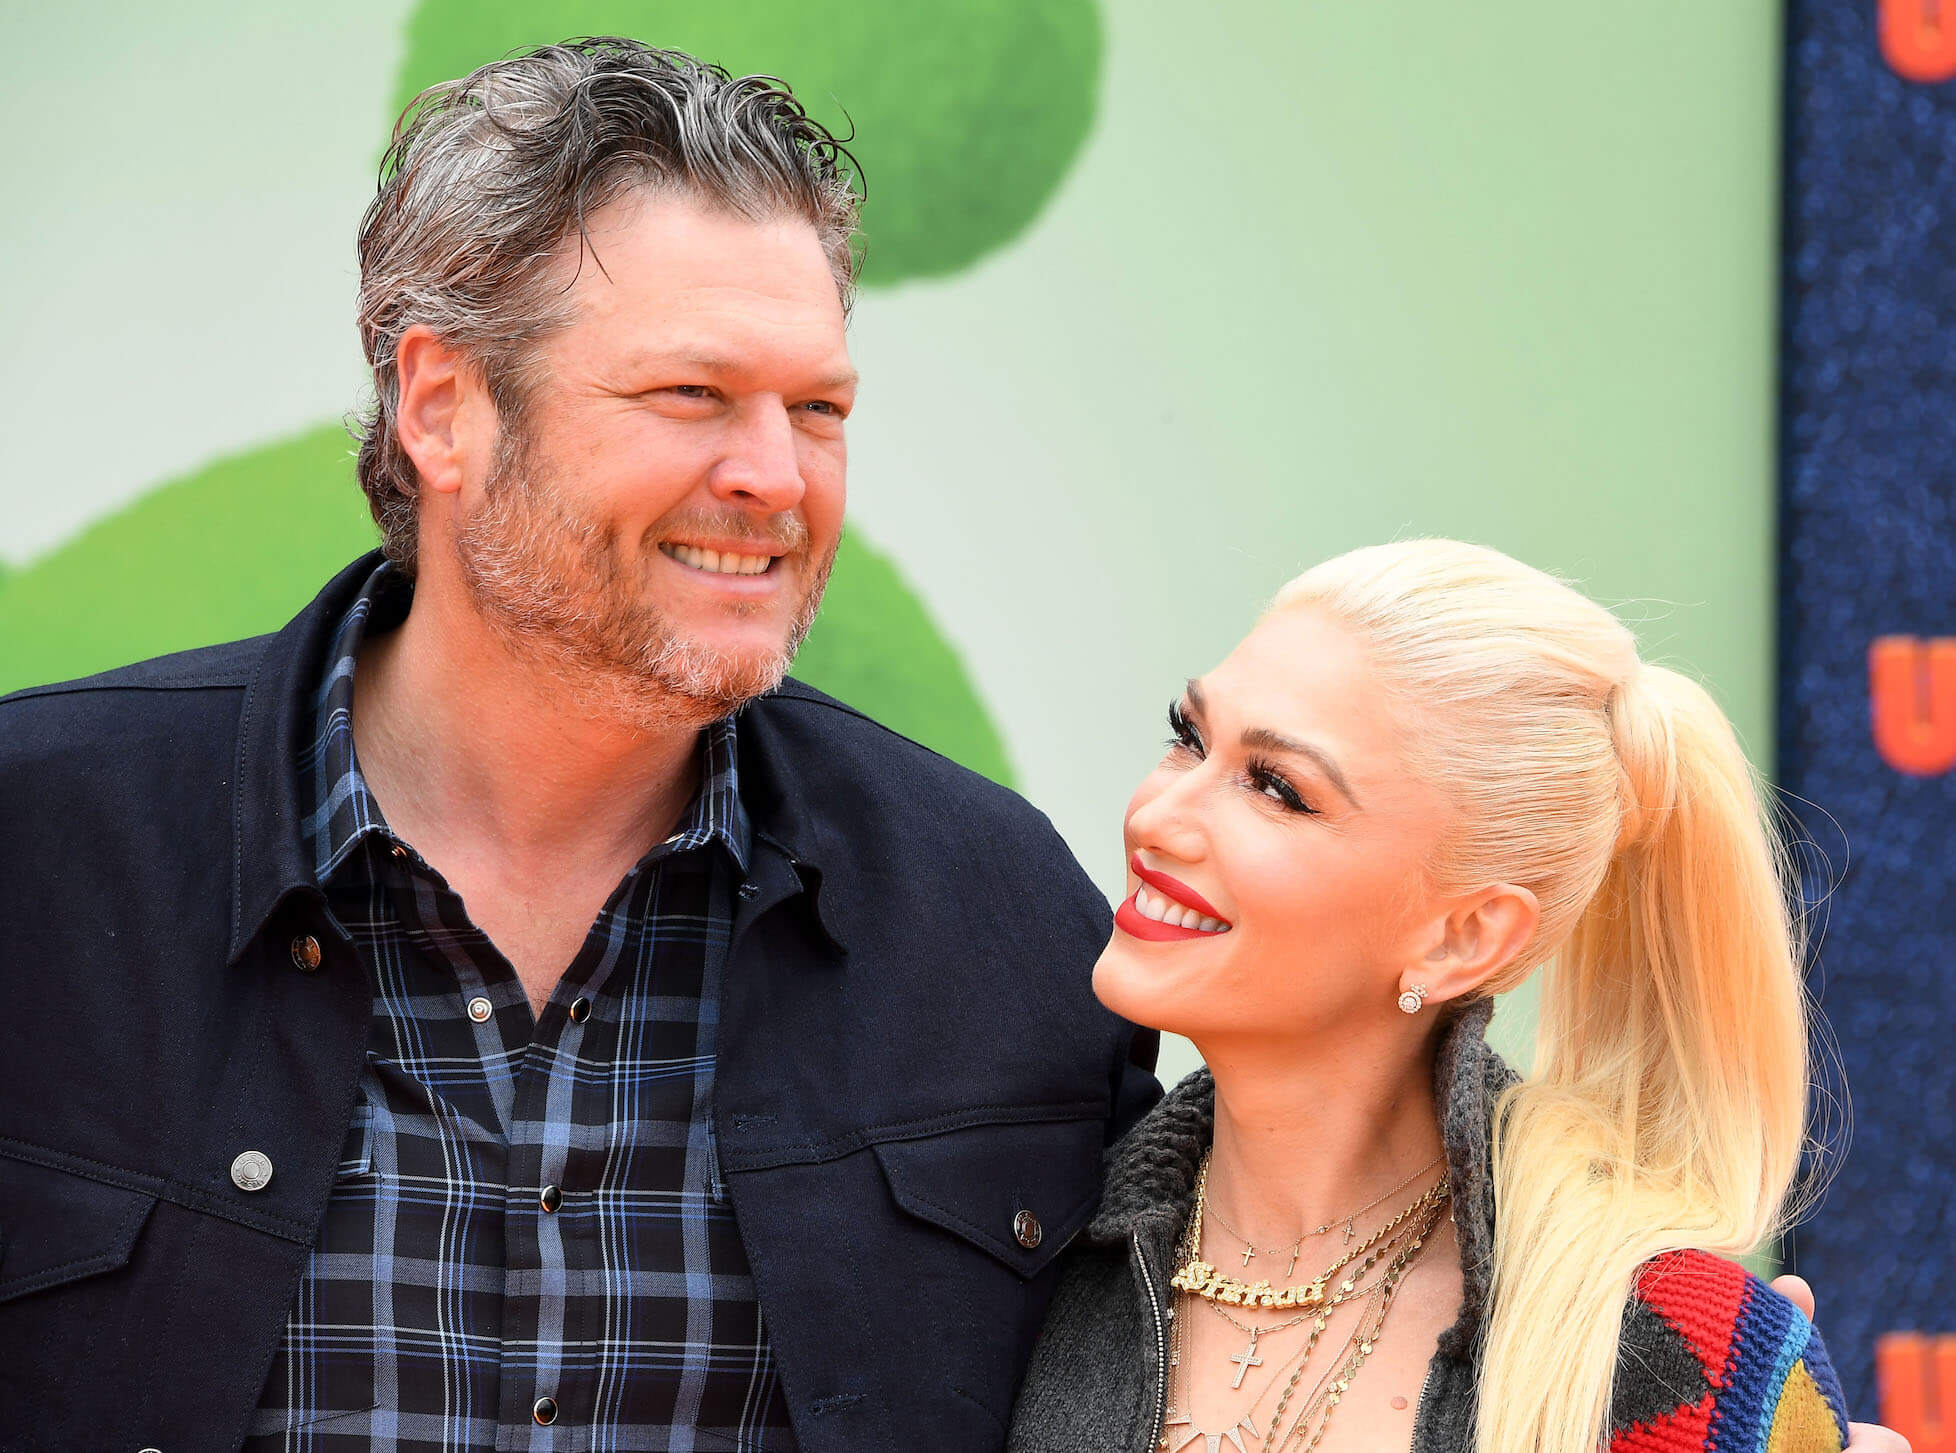 Gwen Stefani smiling and looking up at Blake Shelton against a green background